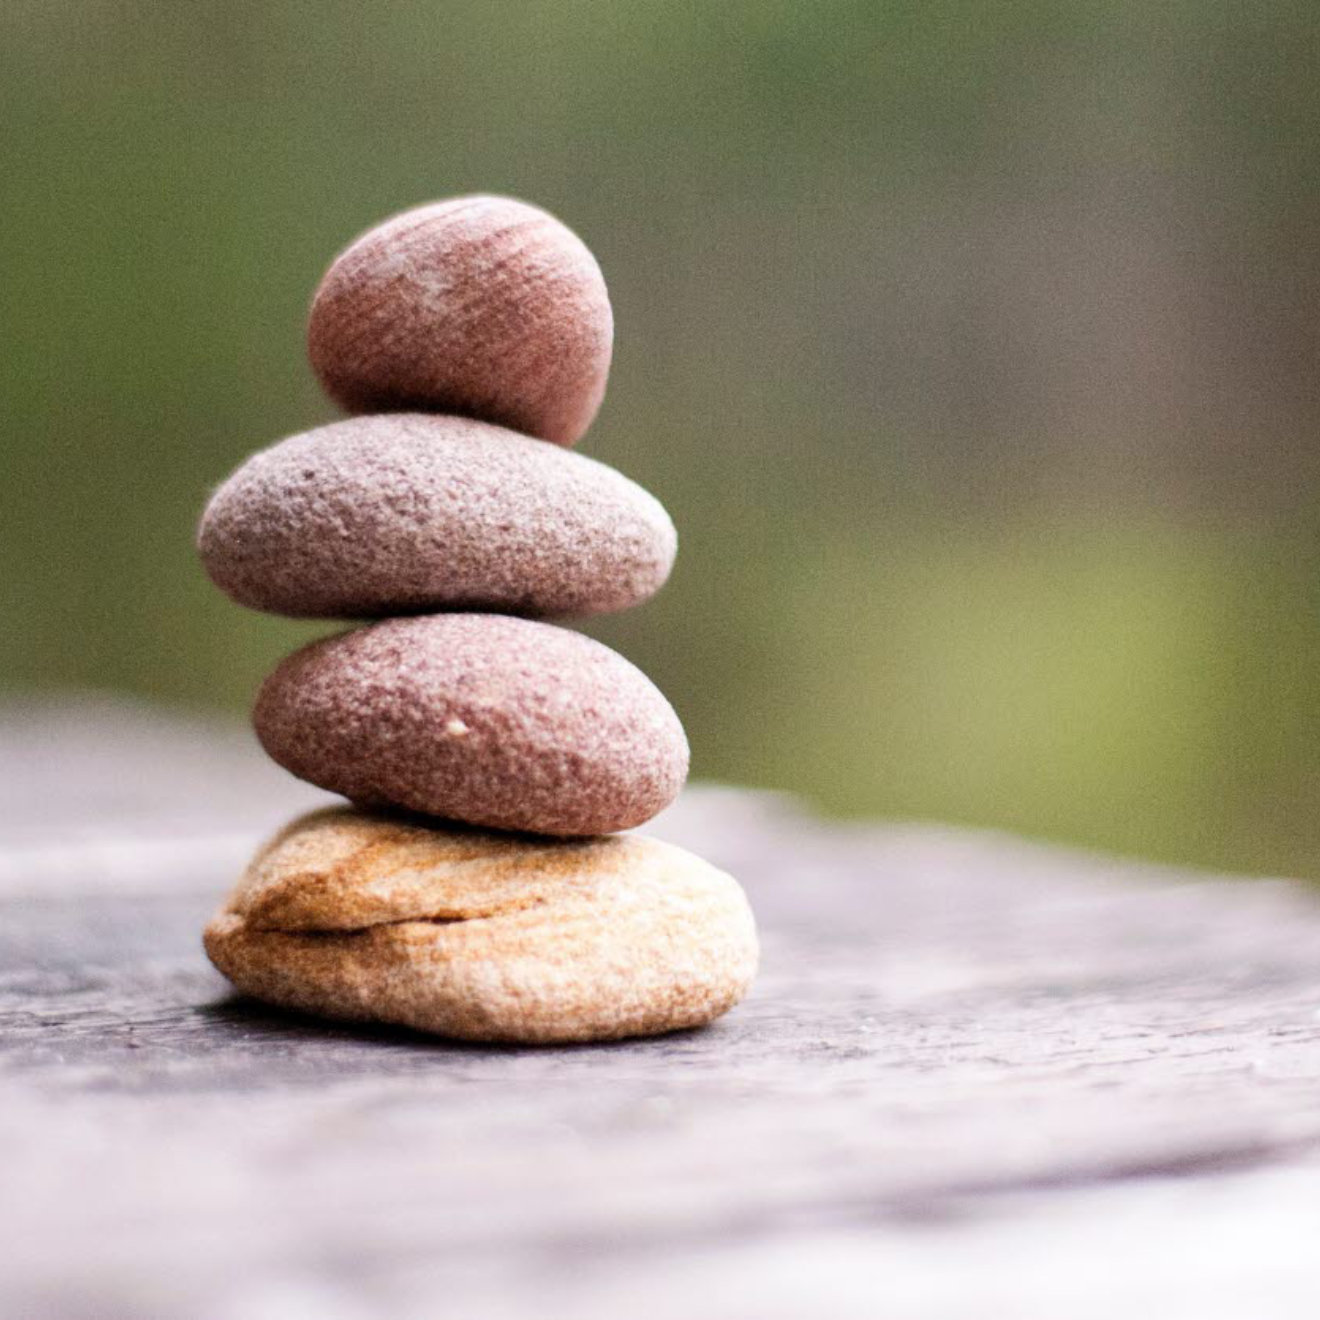 A stack of four pebbles on a wooden bench outdoors